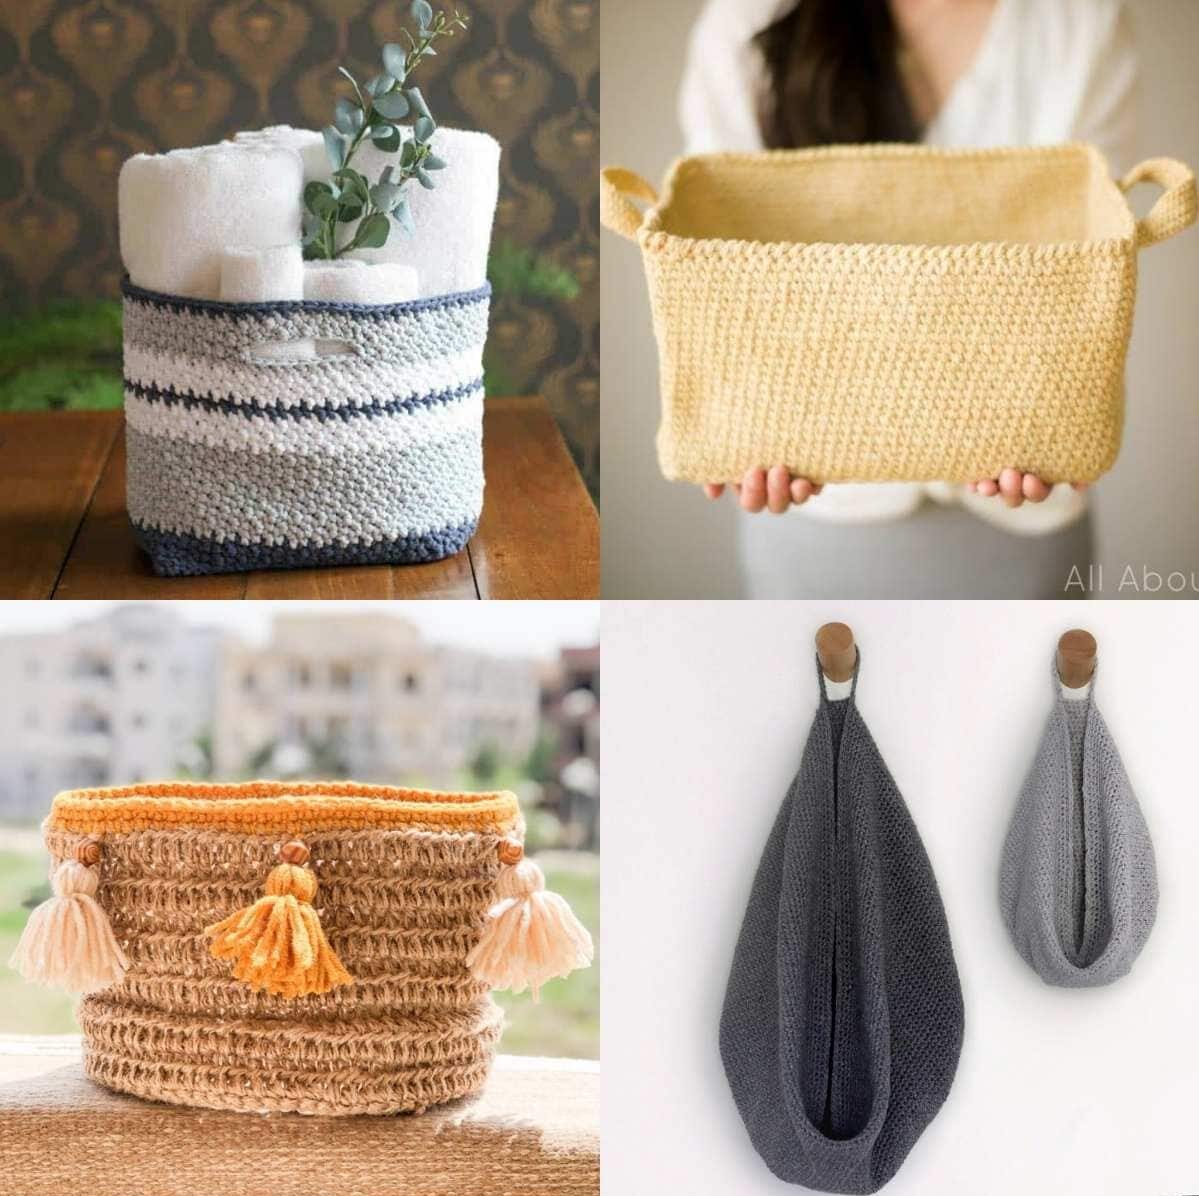 How to make your own crochet oval baskets - free pattern